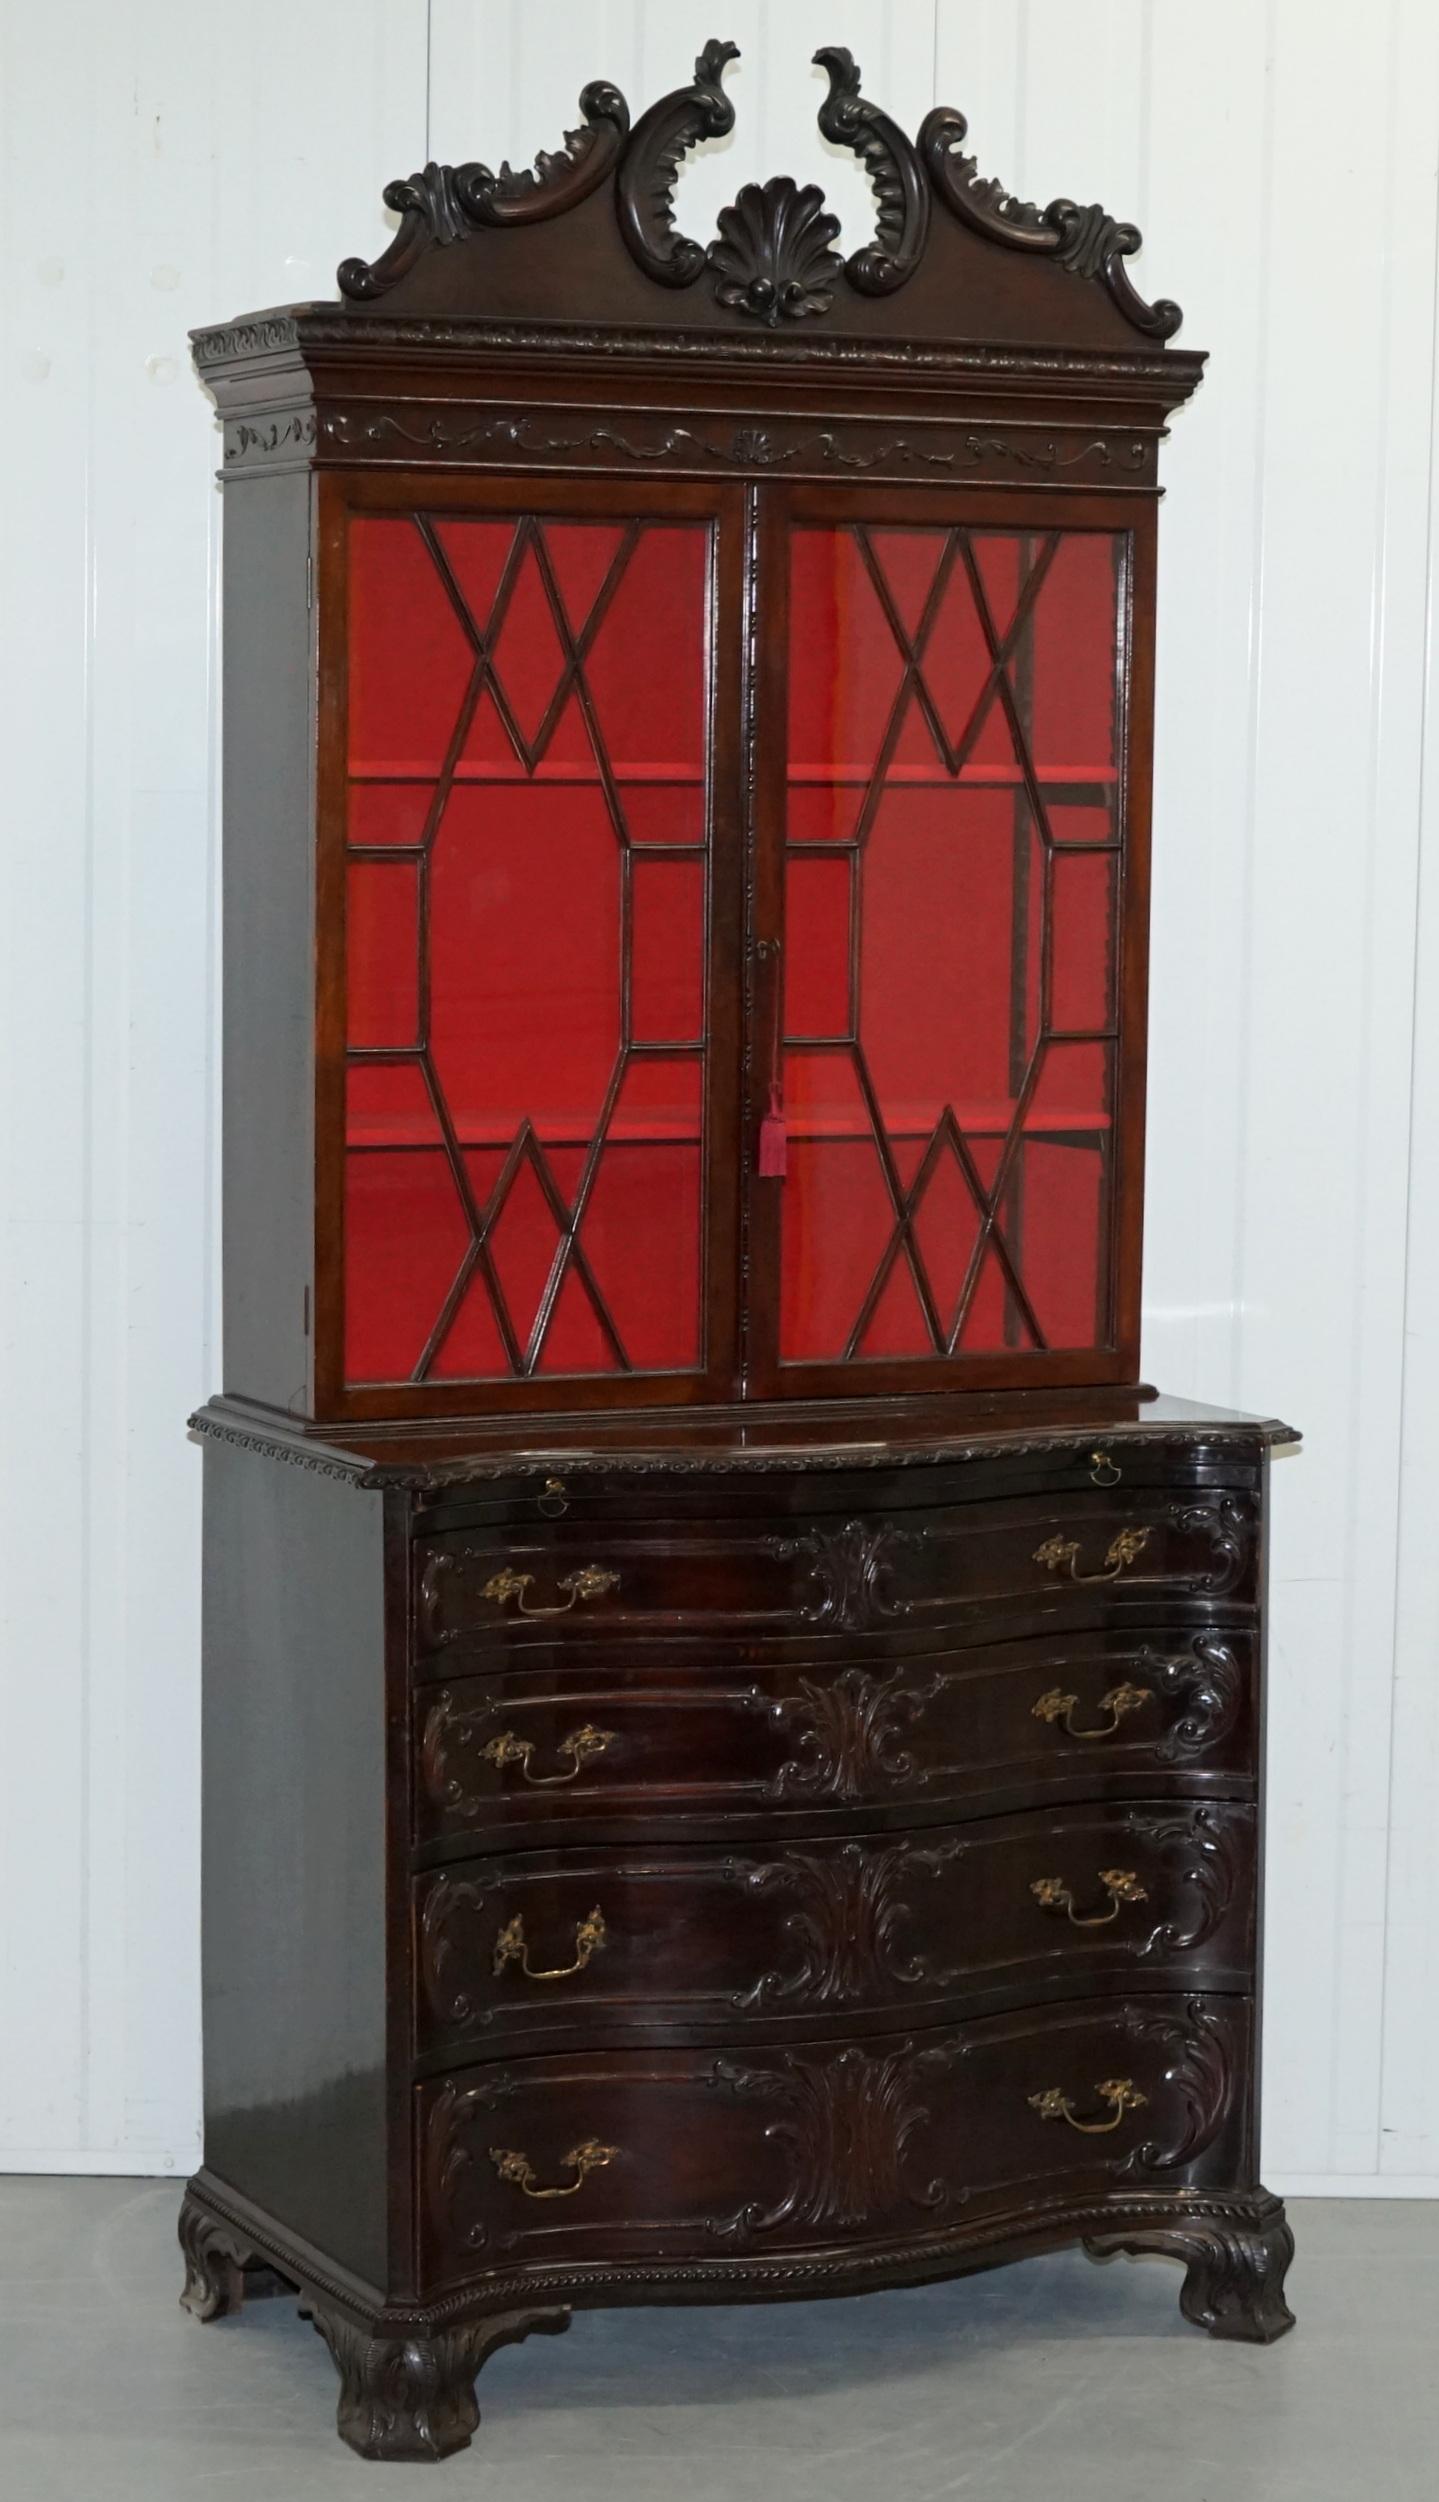 We are delighted to offer for sale this stunning George III Thomas Chippendale style mahogany bookcase on serpentine chest of drawers

A glorious find, truly stunning, after original Thomas Chippendale pieces, circa 1800.

The chest of drawers